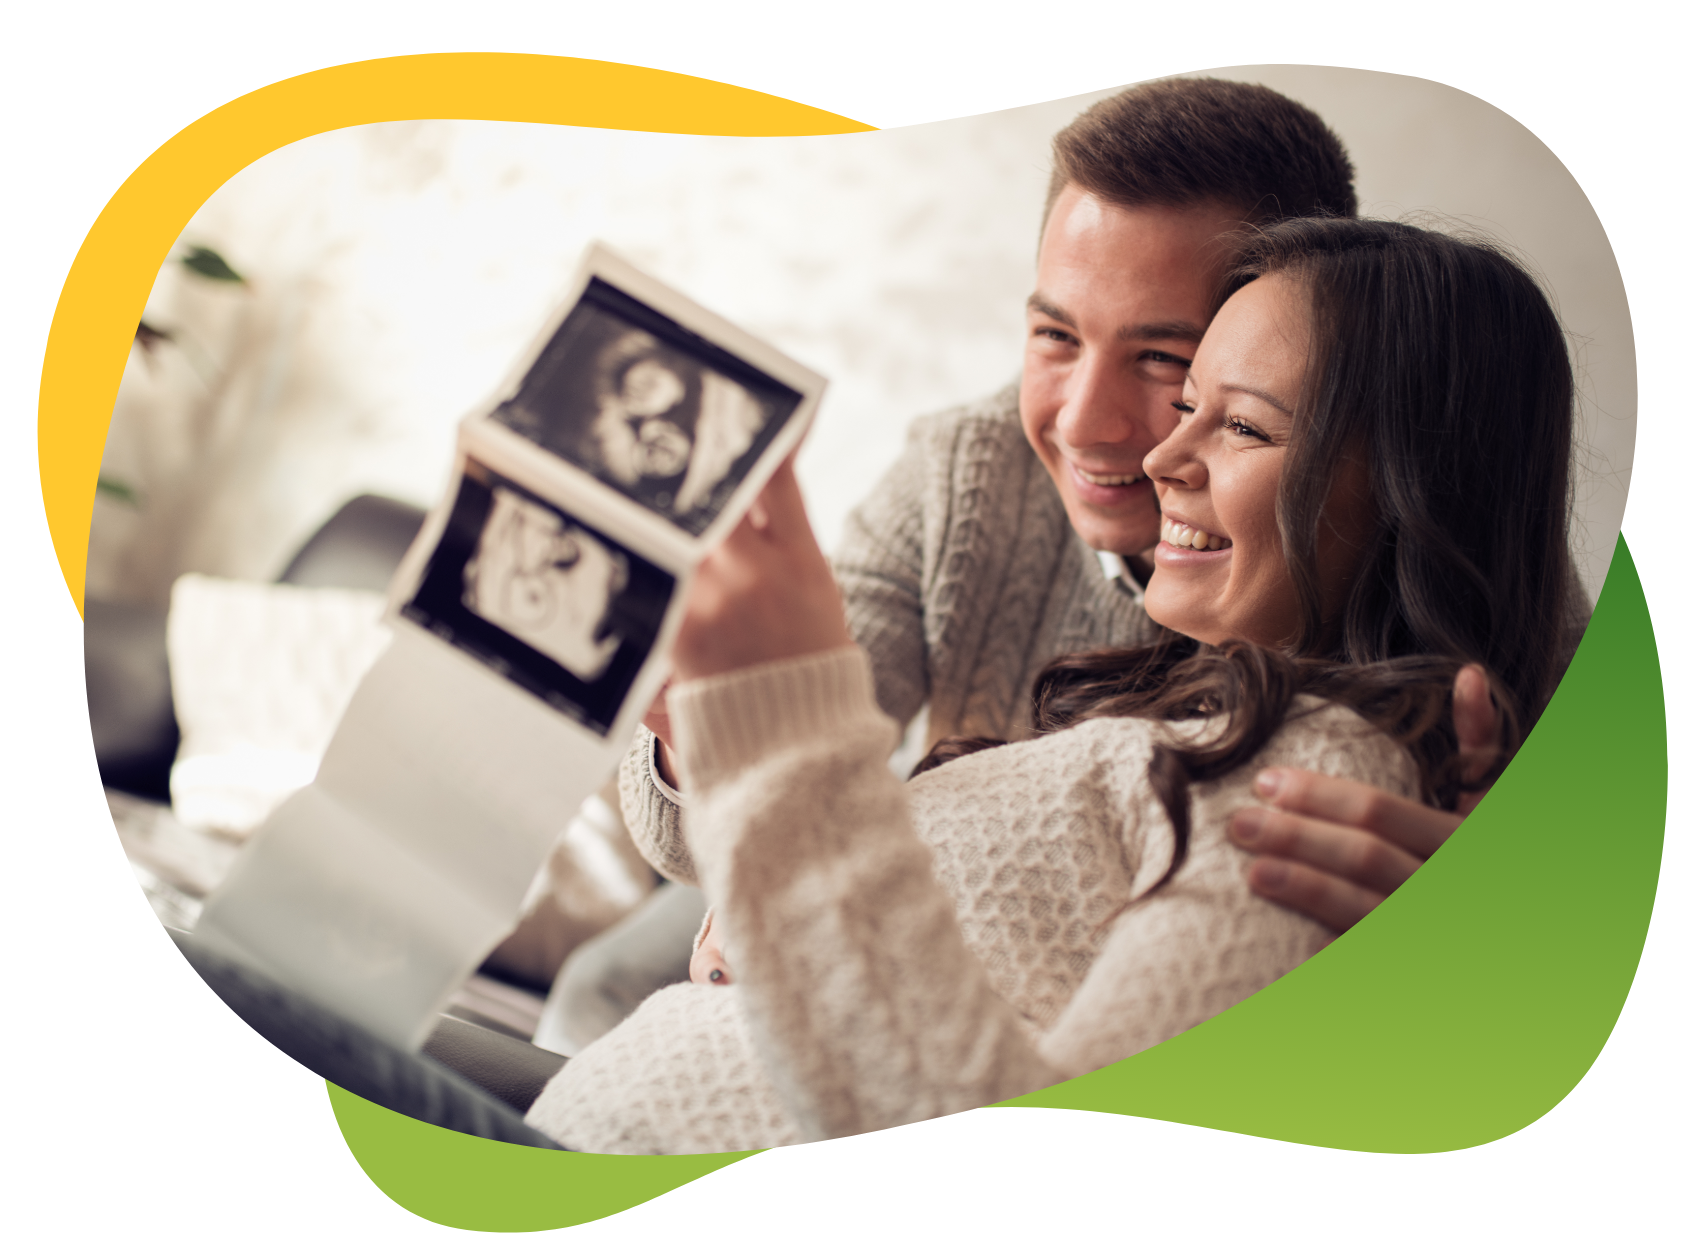 Parents-to be look at ultrasound images of the baby